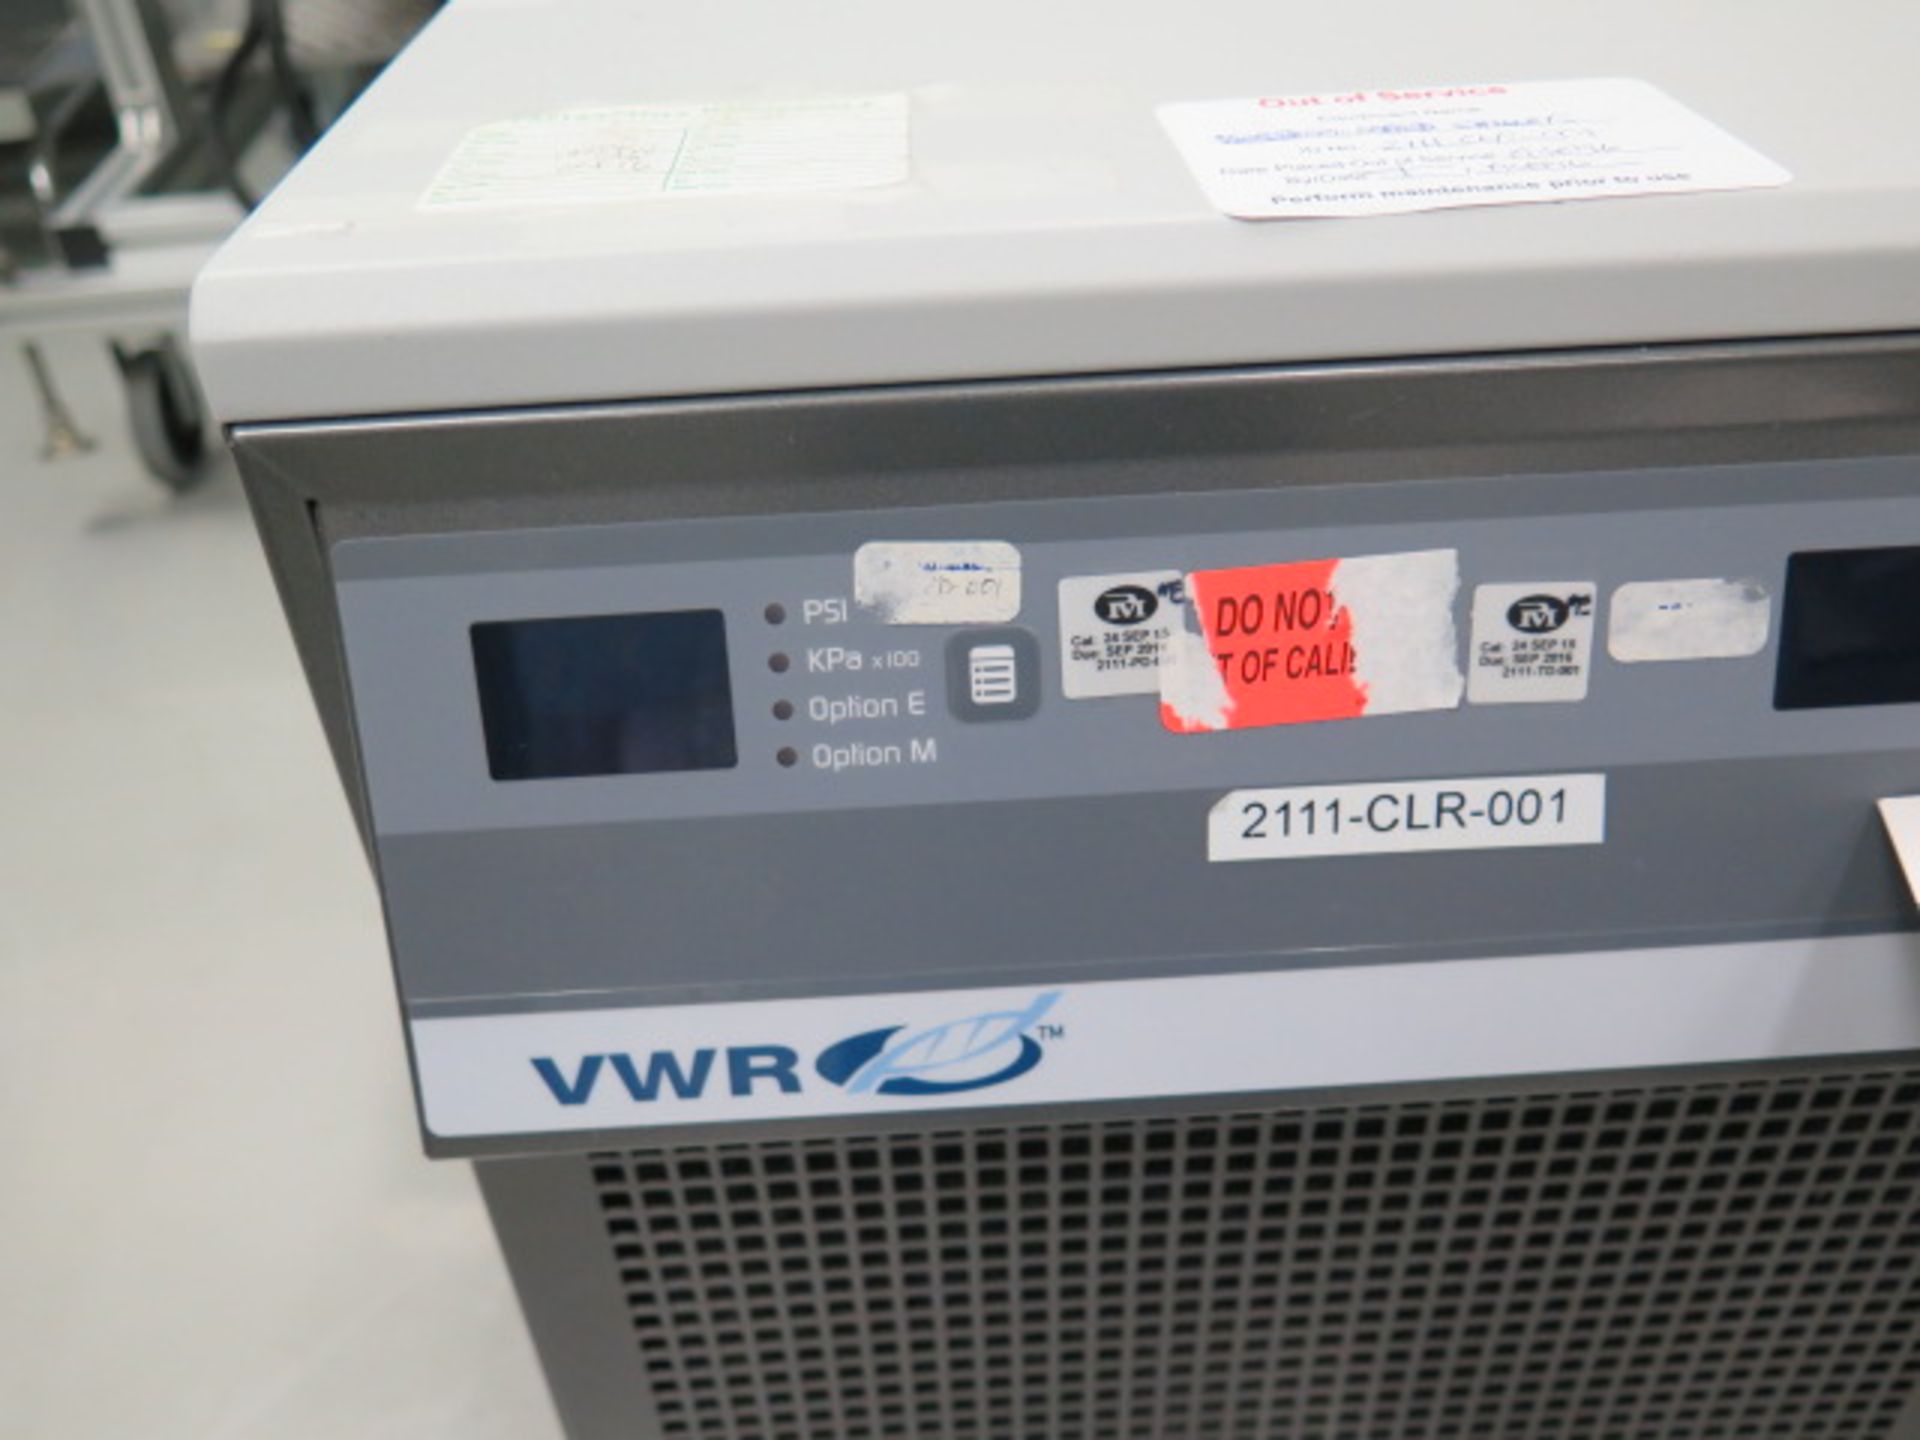 VWR mdl. 1179PD “Recirculator” Refrigerated Cooling System s/n SM1490532 (SOLD AS-IS - NO WARRANTY) - Image 10 of 13